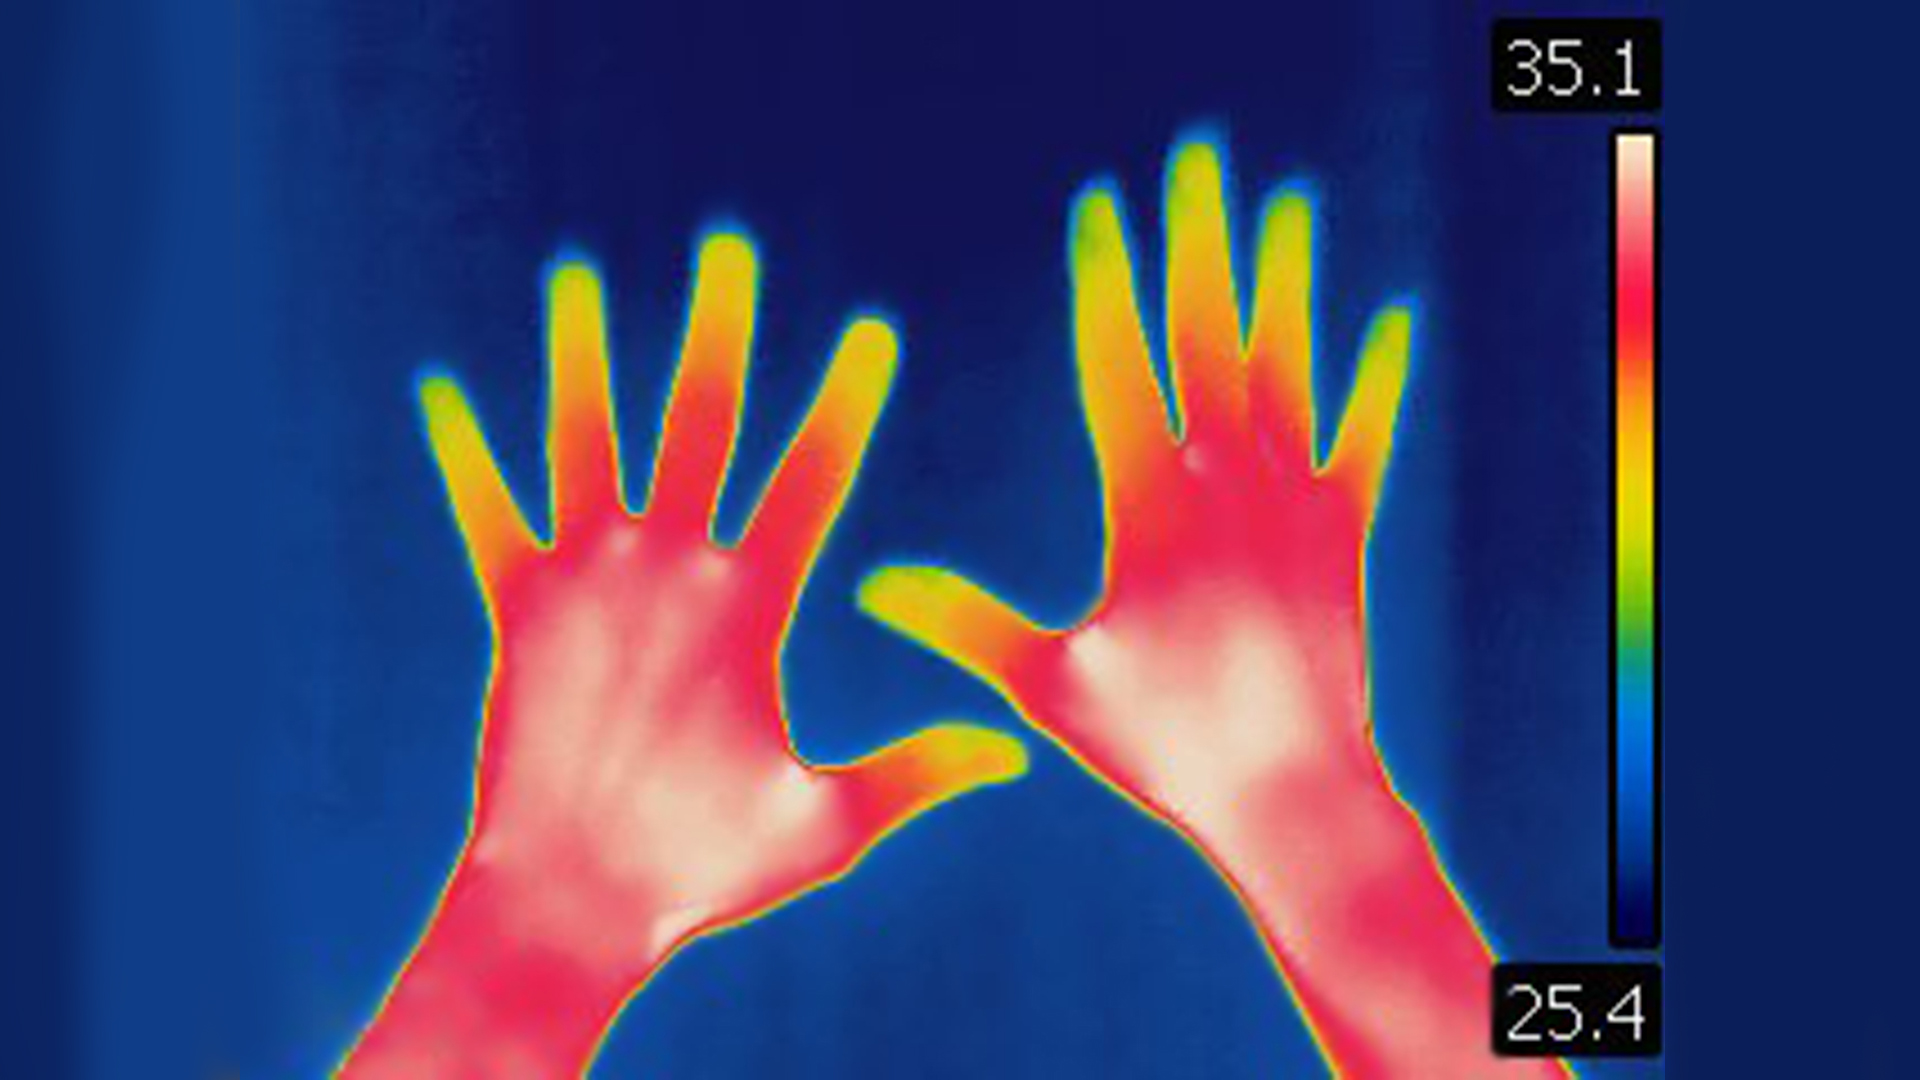 Thermal imaging could improve hand hygiene in hospitals